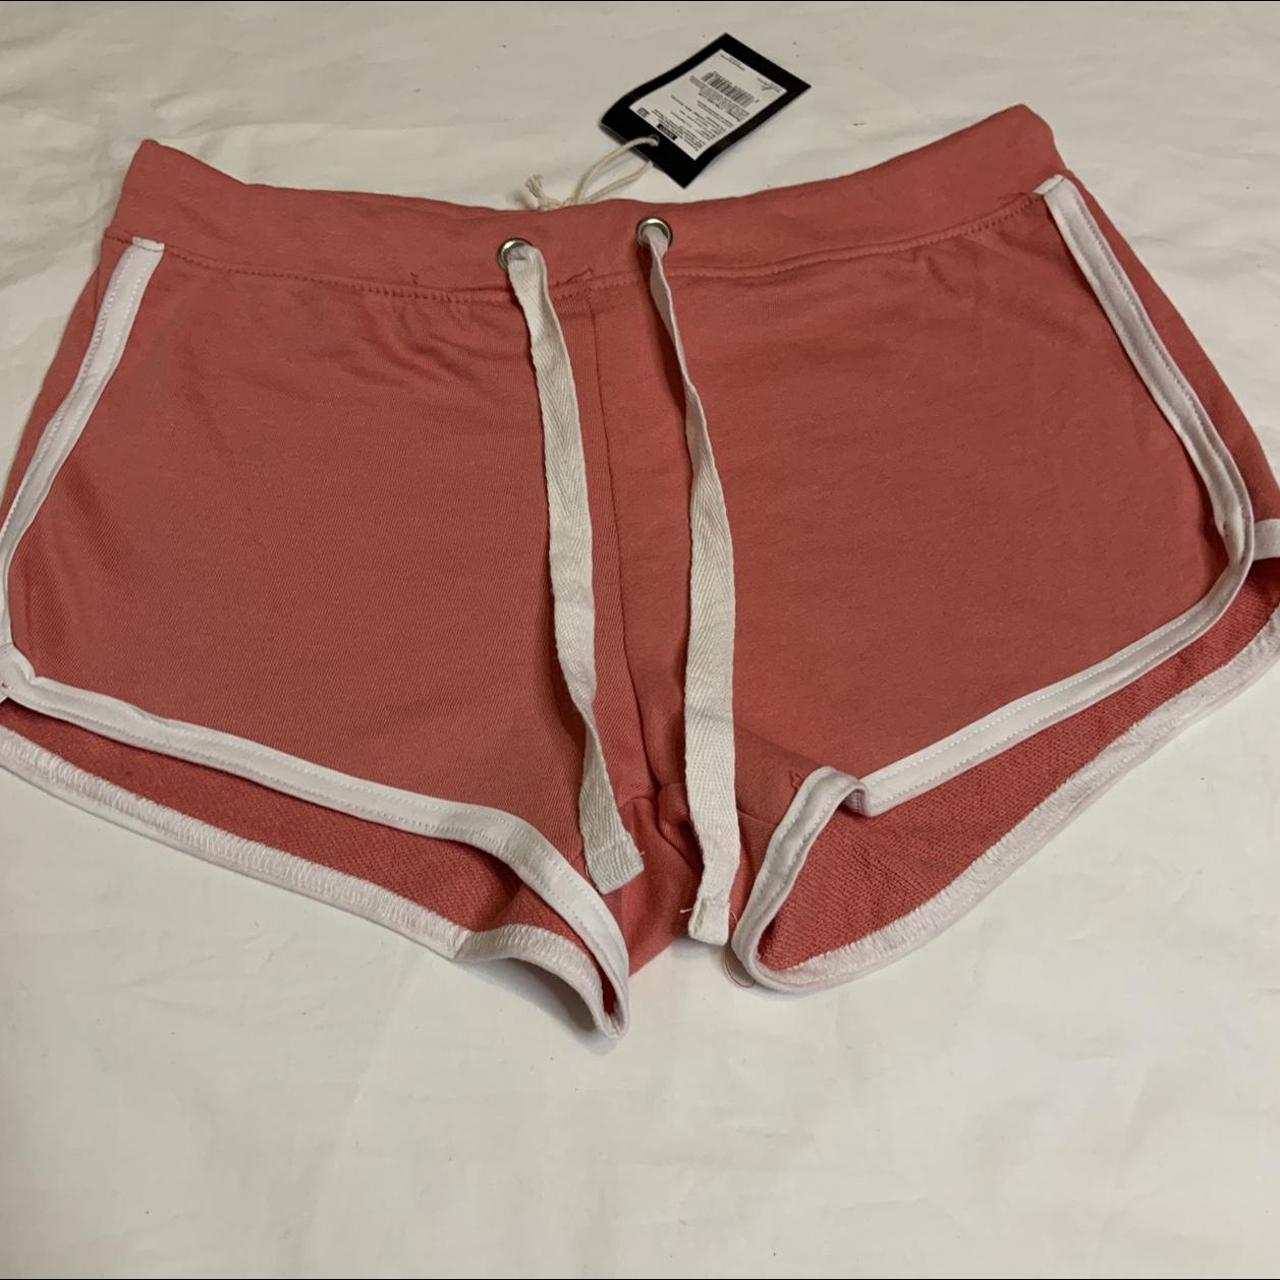 Women's Pink and White Shorts | Depop